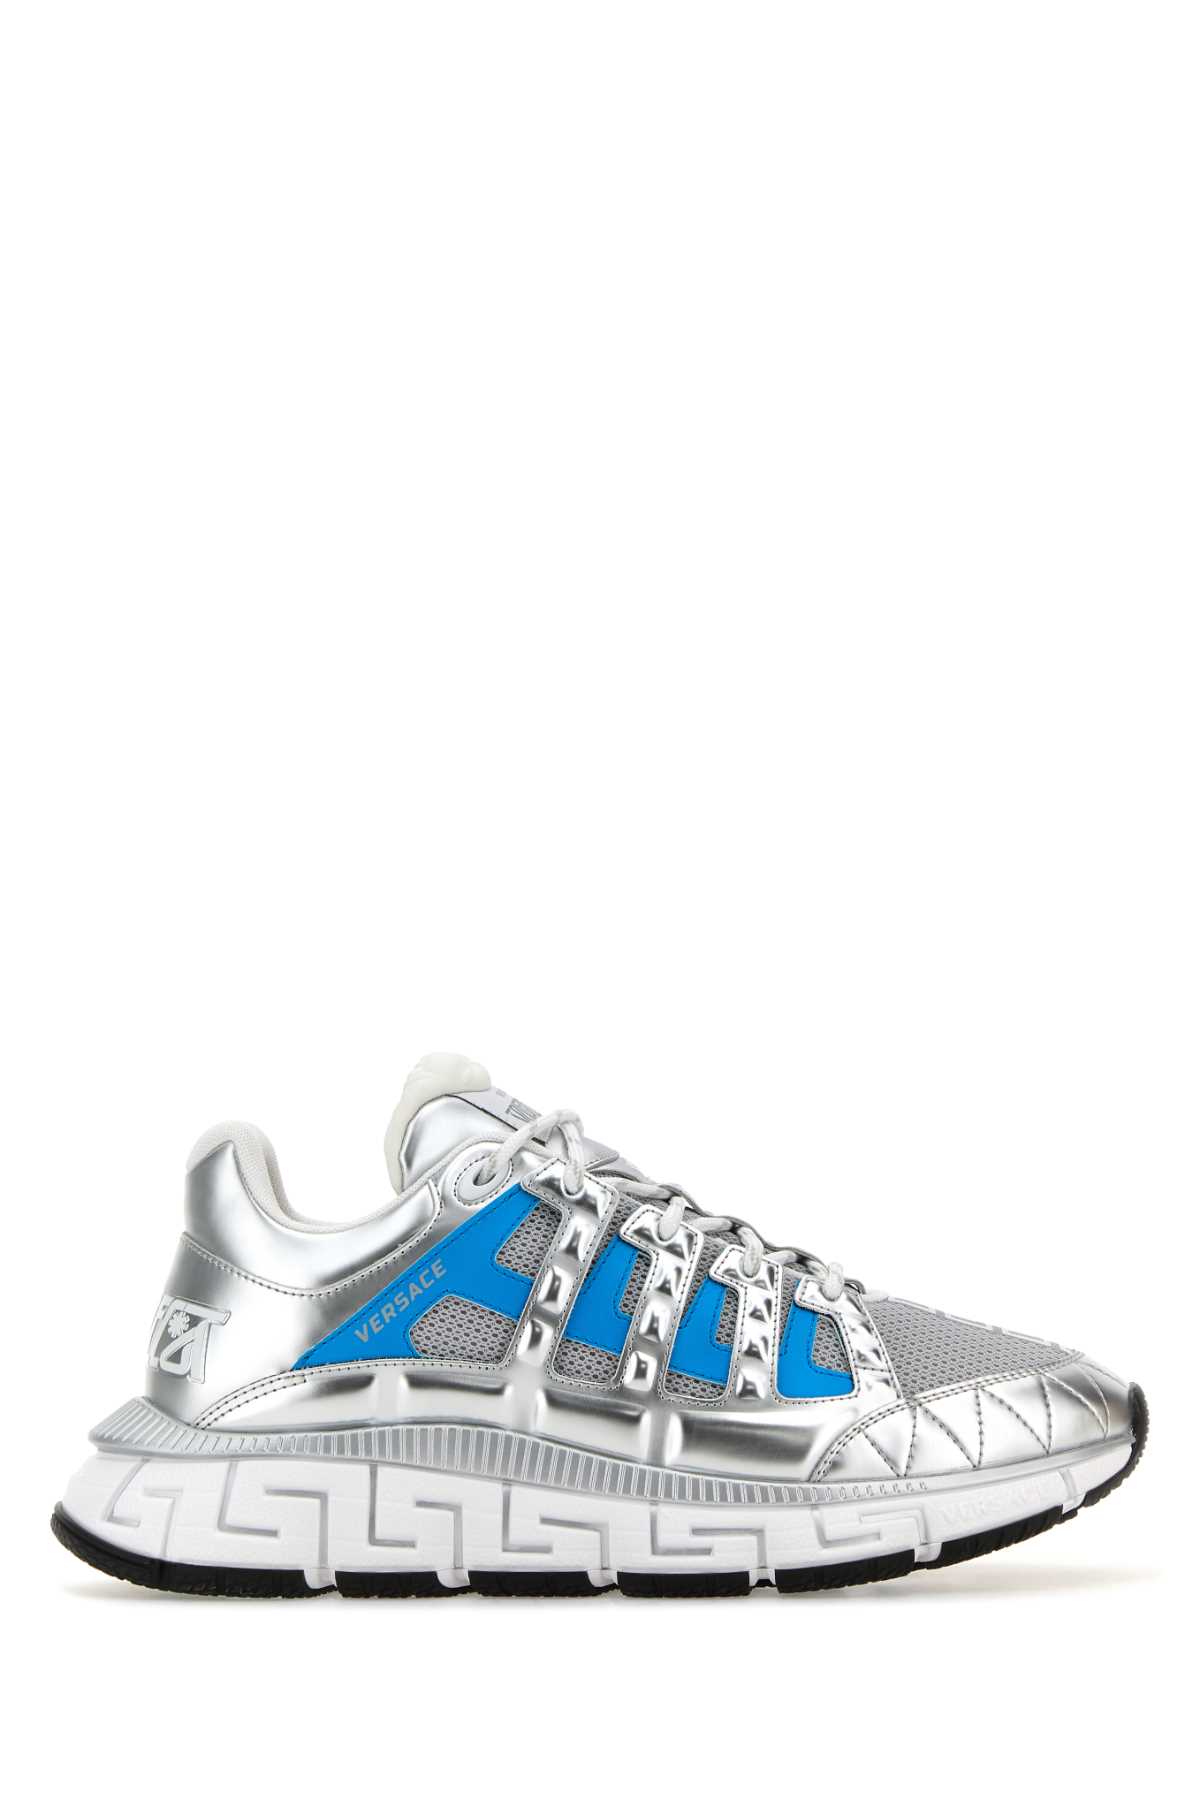 Versace Multicolor Fabric And Leather Trigreca Sneakers In Silverbluewhite